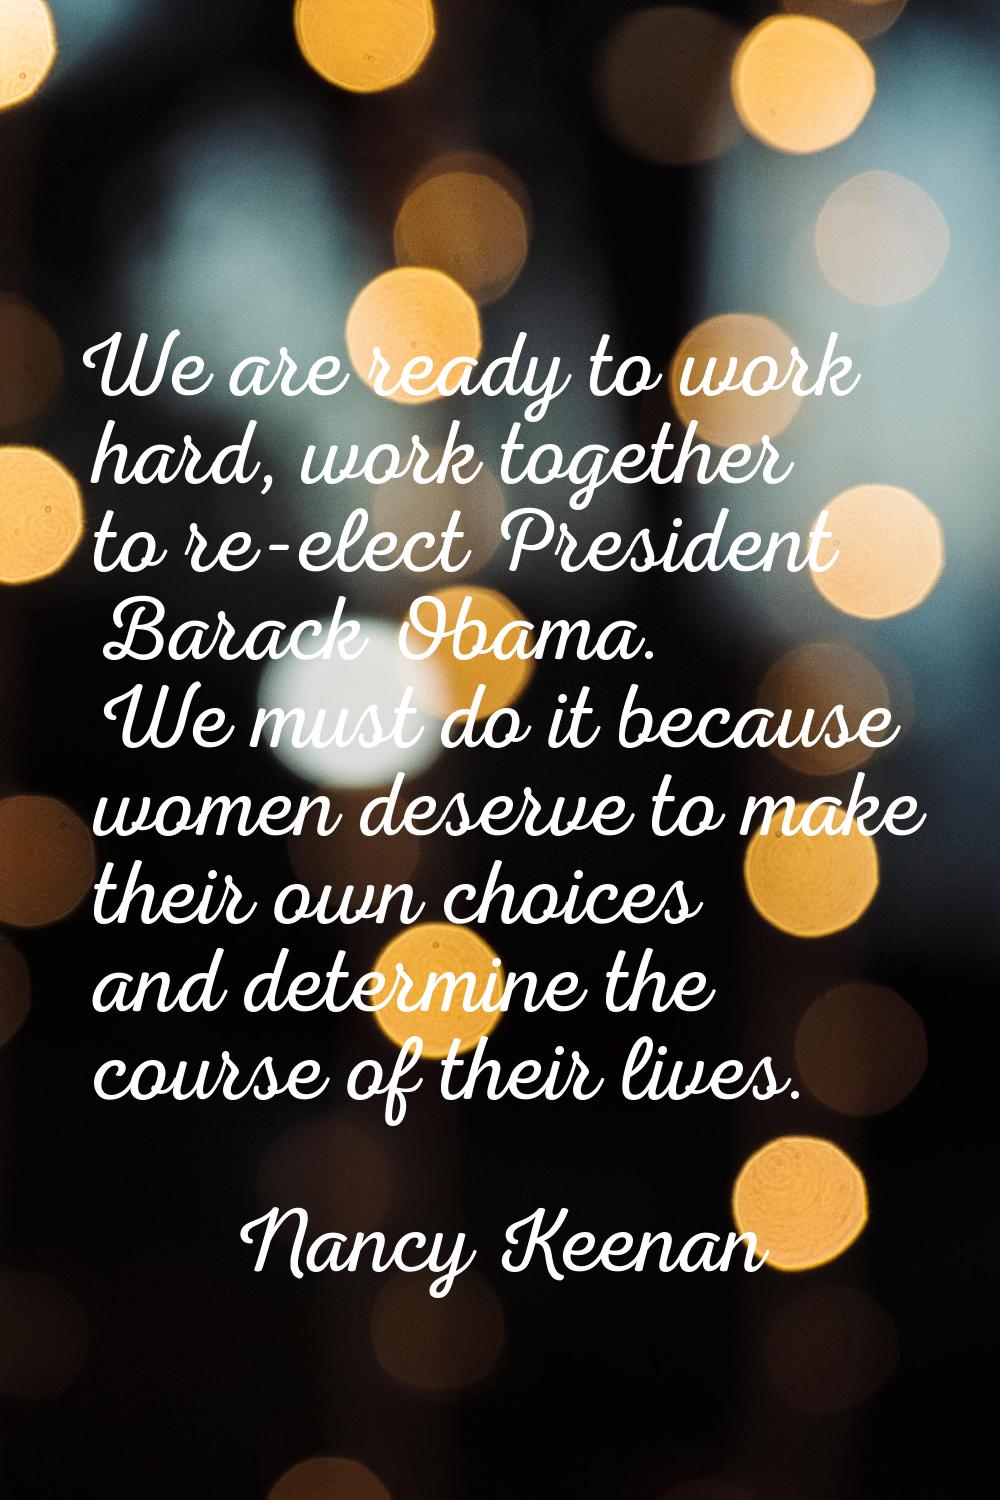 We are ready to work hard, work together to re-elect President Barack Obama. We must do it because 